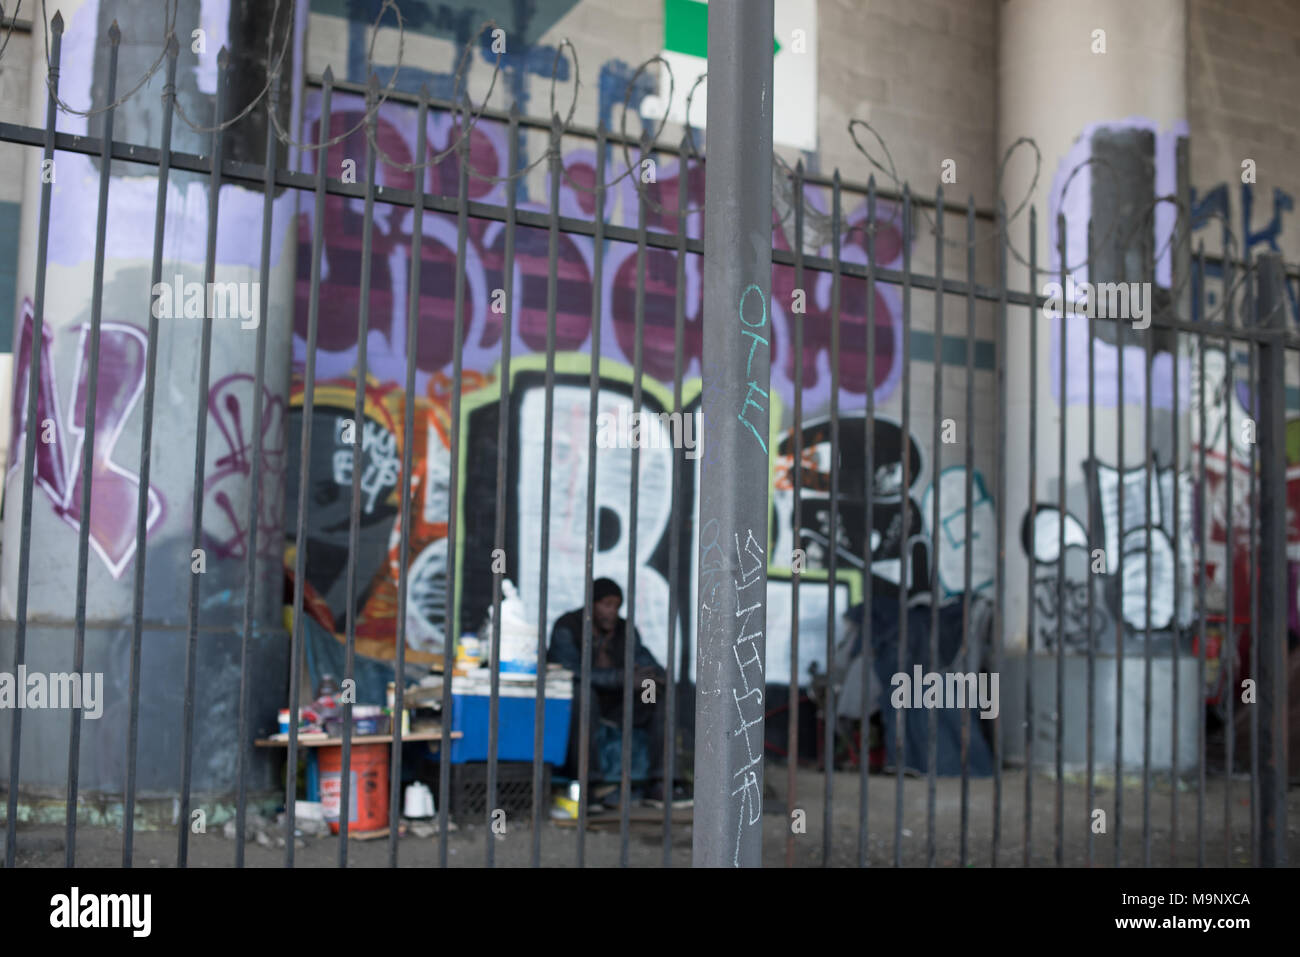 LOS ANGELES, CA - March 15, 2018: Unidentified homeless person sitting on the sidewalk under the bridge in Downtown of Los Angeles on March 15, 2018, Stock Photo